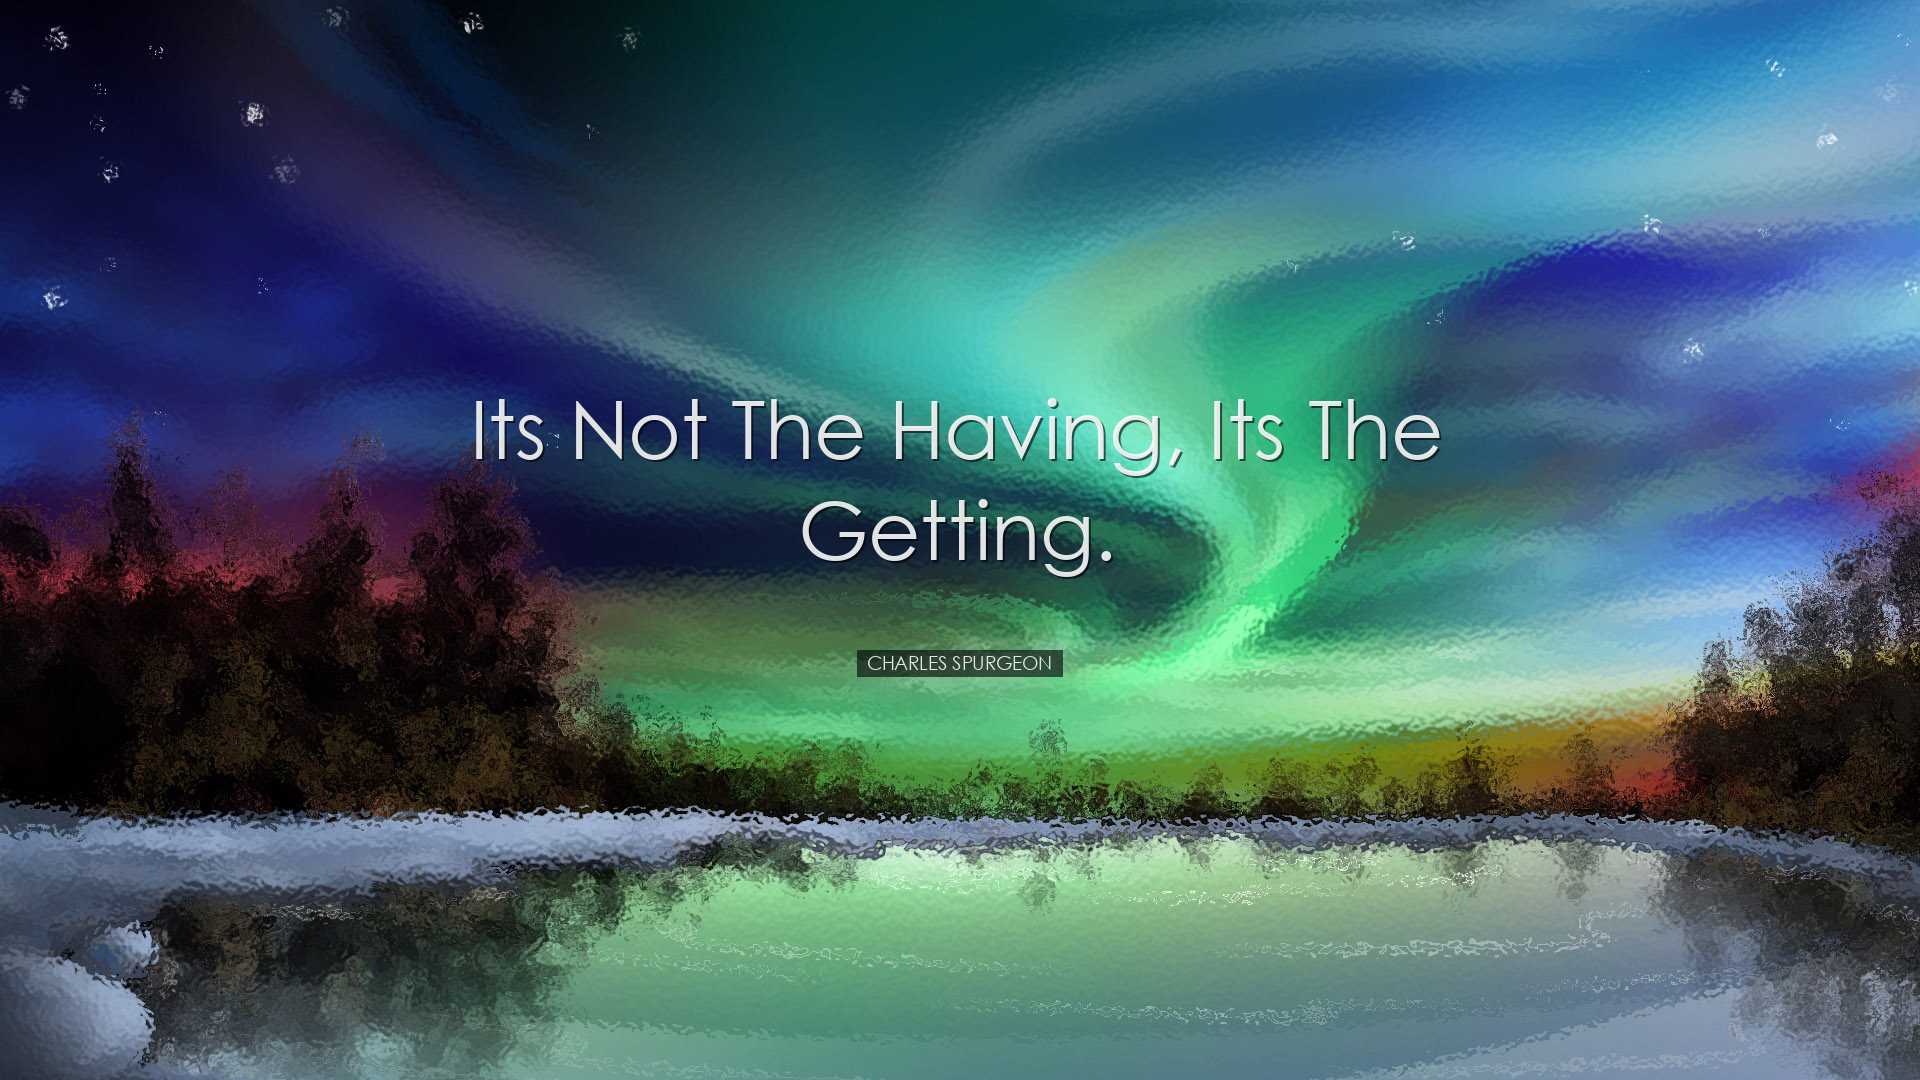 Its not the having, its the getting. - Charles Spurgeon